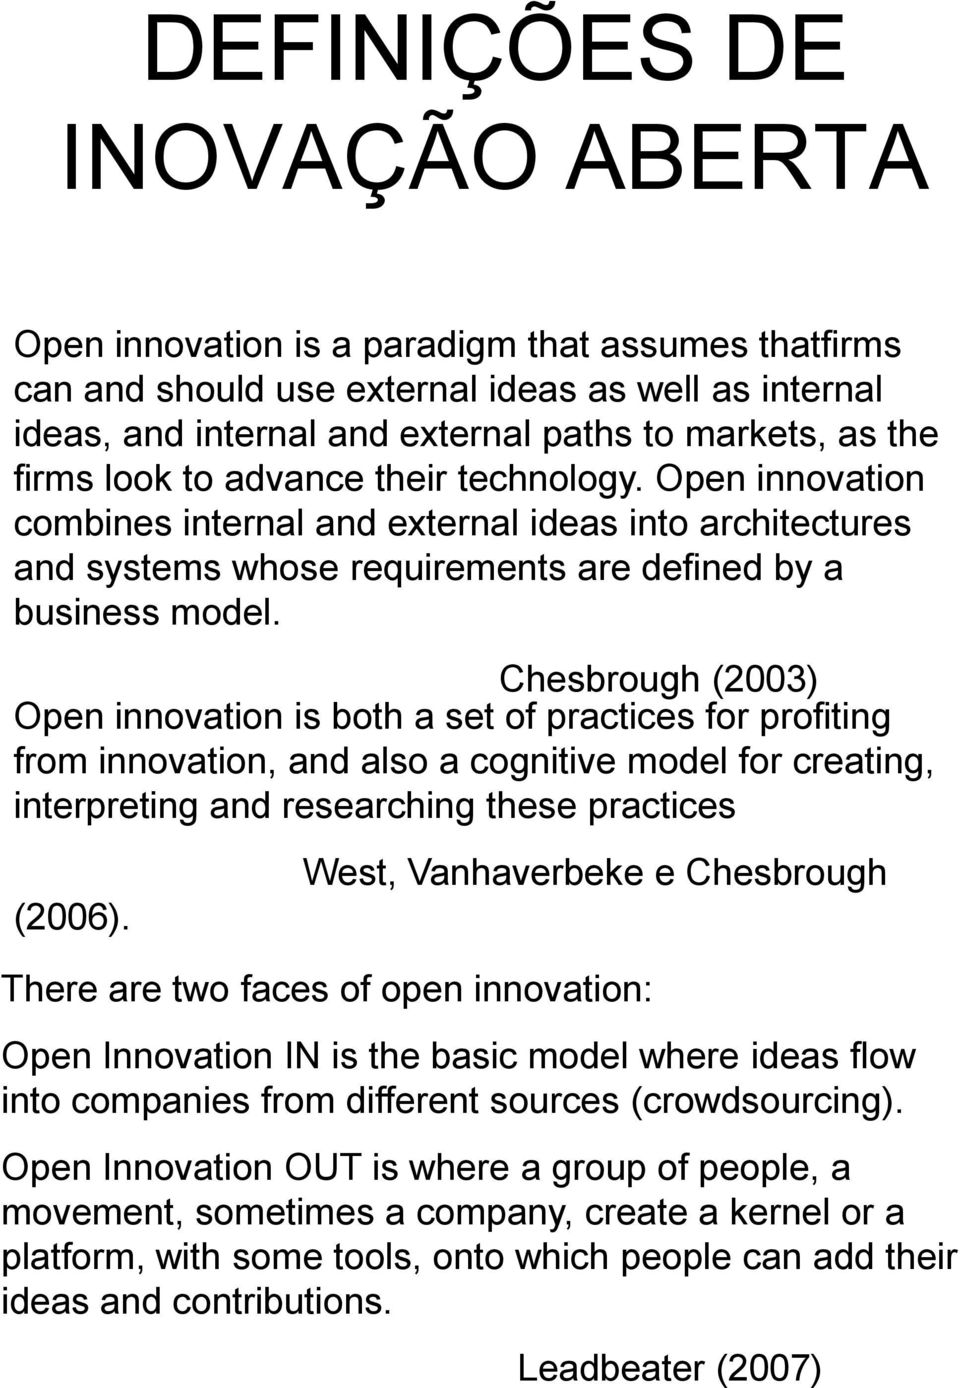 Chesbrough (2003) Open innovation is both a set of practices for profiting from innovation, and also a cognitive model for creating, interpreting and researching these practices (2006).